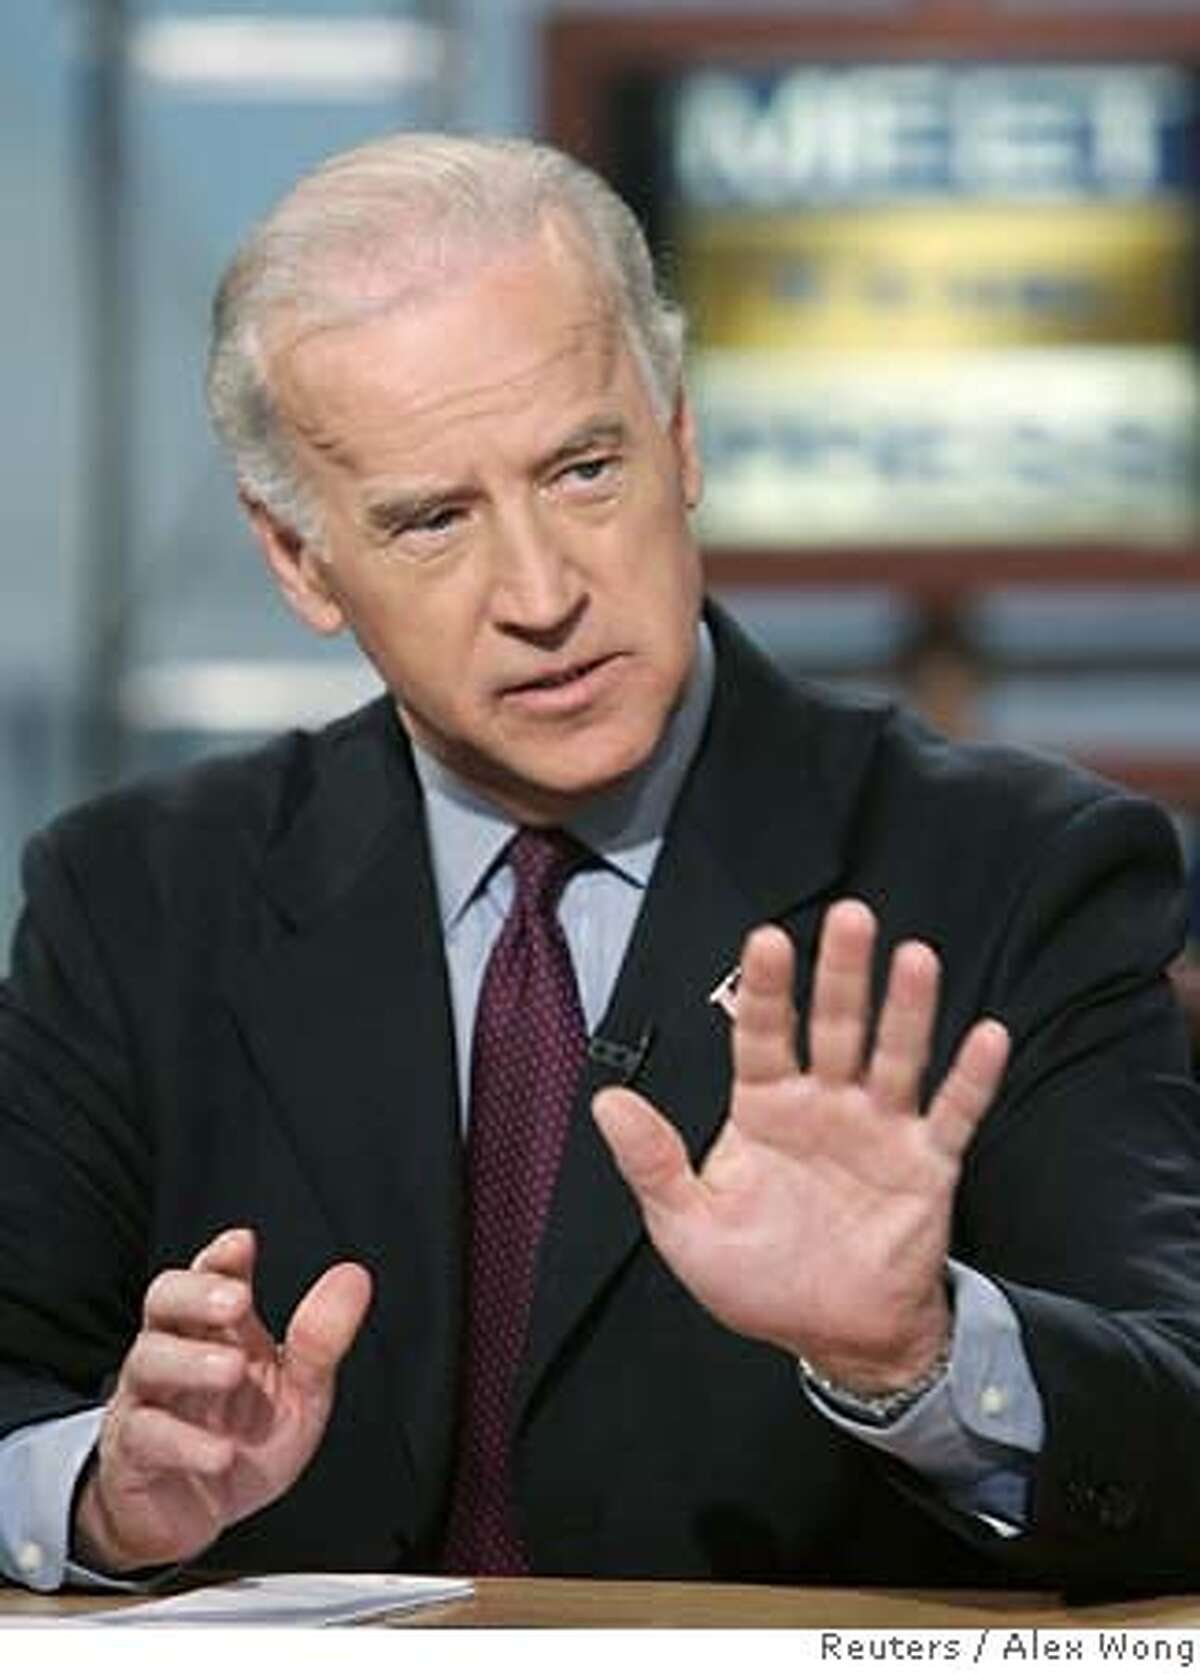 U.S. Sen. Joseph Biden (D-De) speaks during a taping of "Meet the Press" at the NBC studios in Washington January 7, 2007. Biden discussed the current situation in Iraq and whether the U.S. should send more troops. , NO ARCHIVE, MUST USE BEFORE JANUARY 14, 2007, MUST CREDIT "MEET THE PRESS" FOR EDITORIAL USE ONLY REUTERS/Alex Wong/Meet the Press/Handout (UNITED STATES)